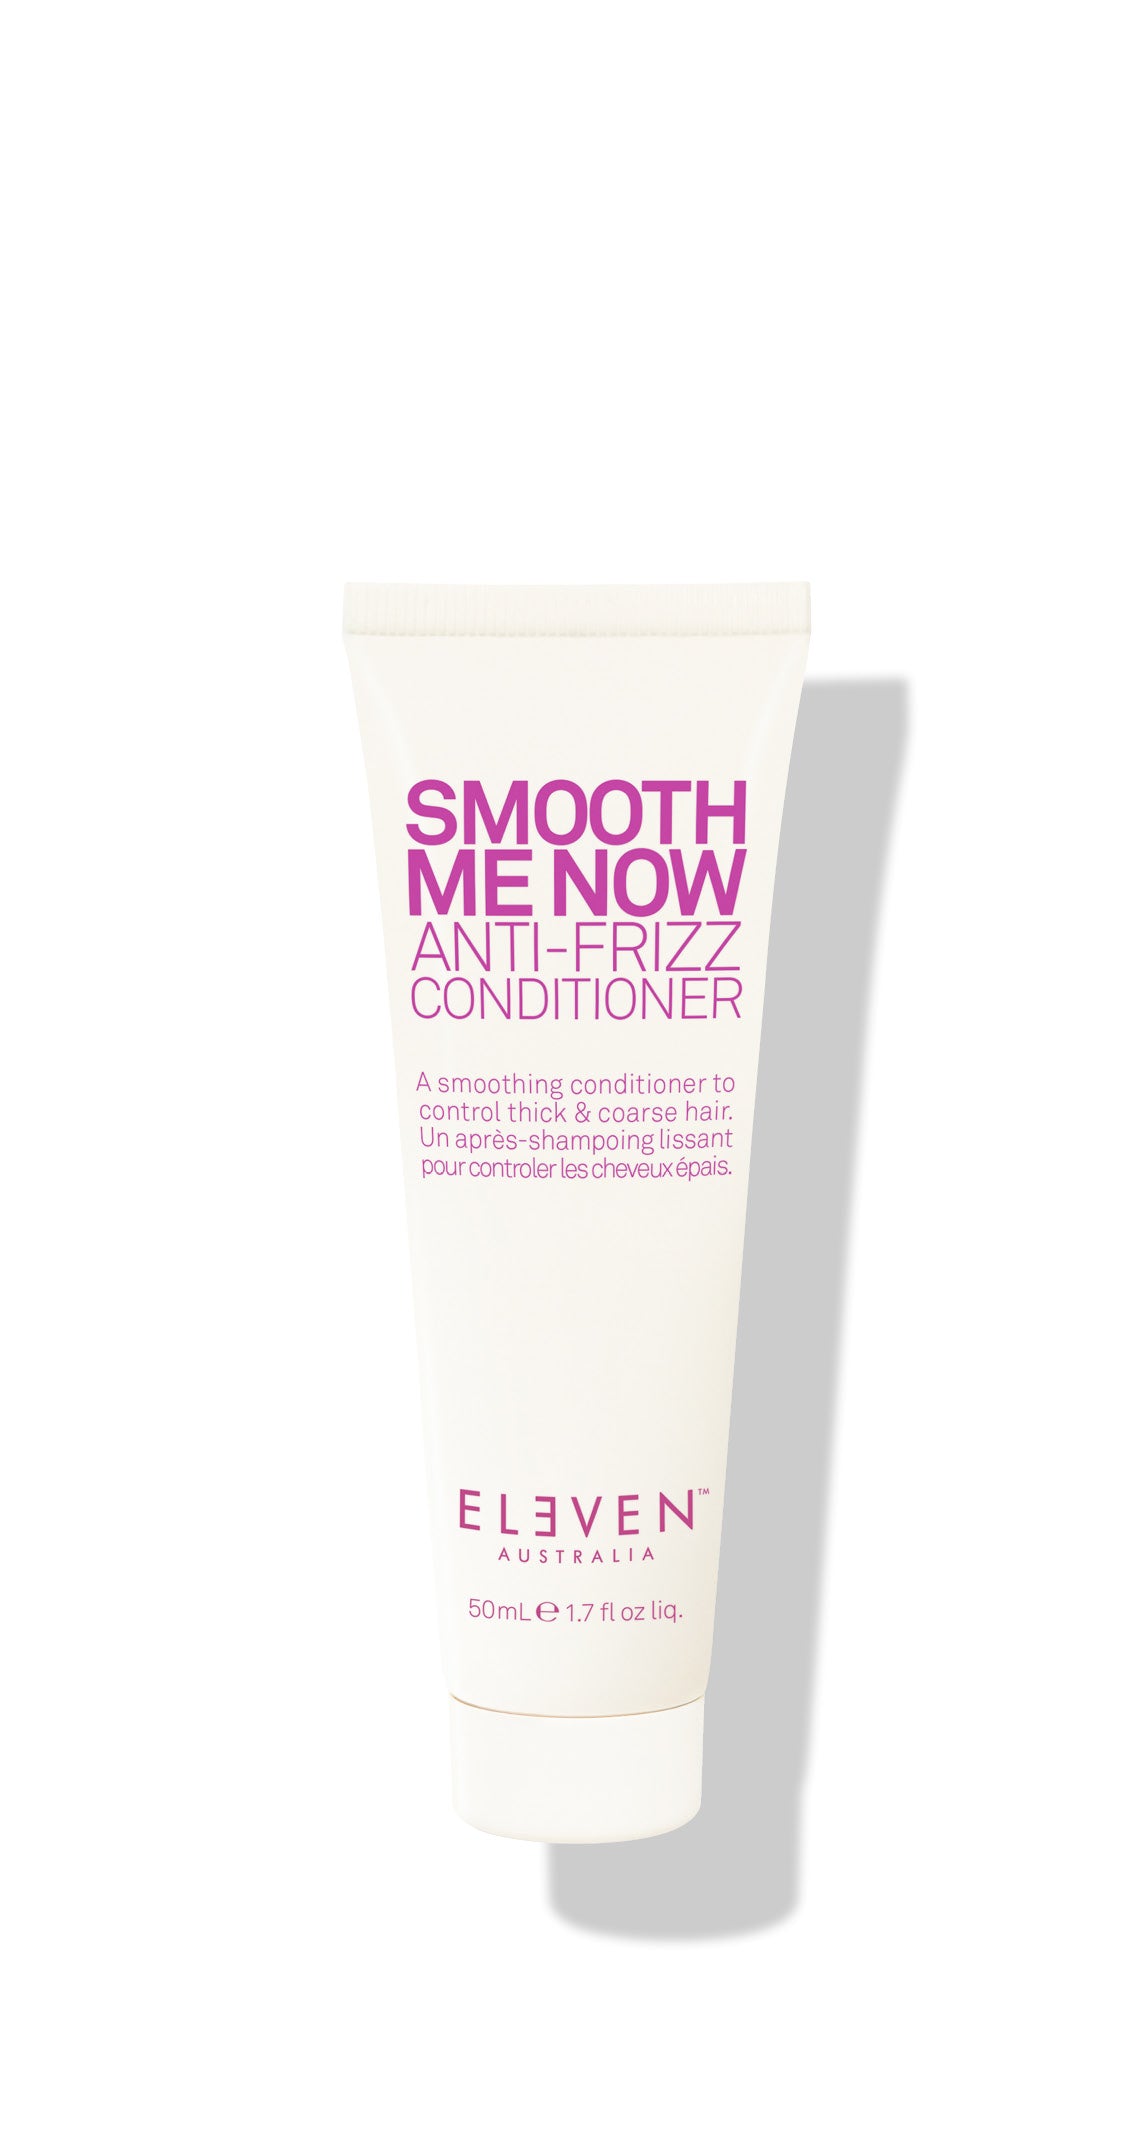 ELEVEN Hair SMOOTH ME NOW ANTI-FRIZZ CONDITIONER. Avocado Oil and Cucumber Extract condition, strengthen and soothes the hair, leaving it smooth and manageable. Use before styling for all-day frizz control.